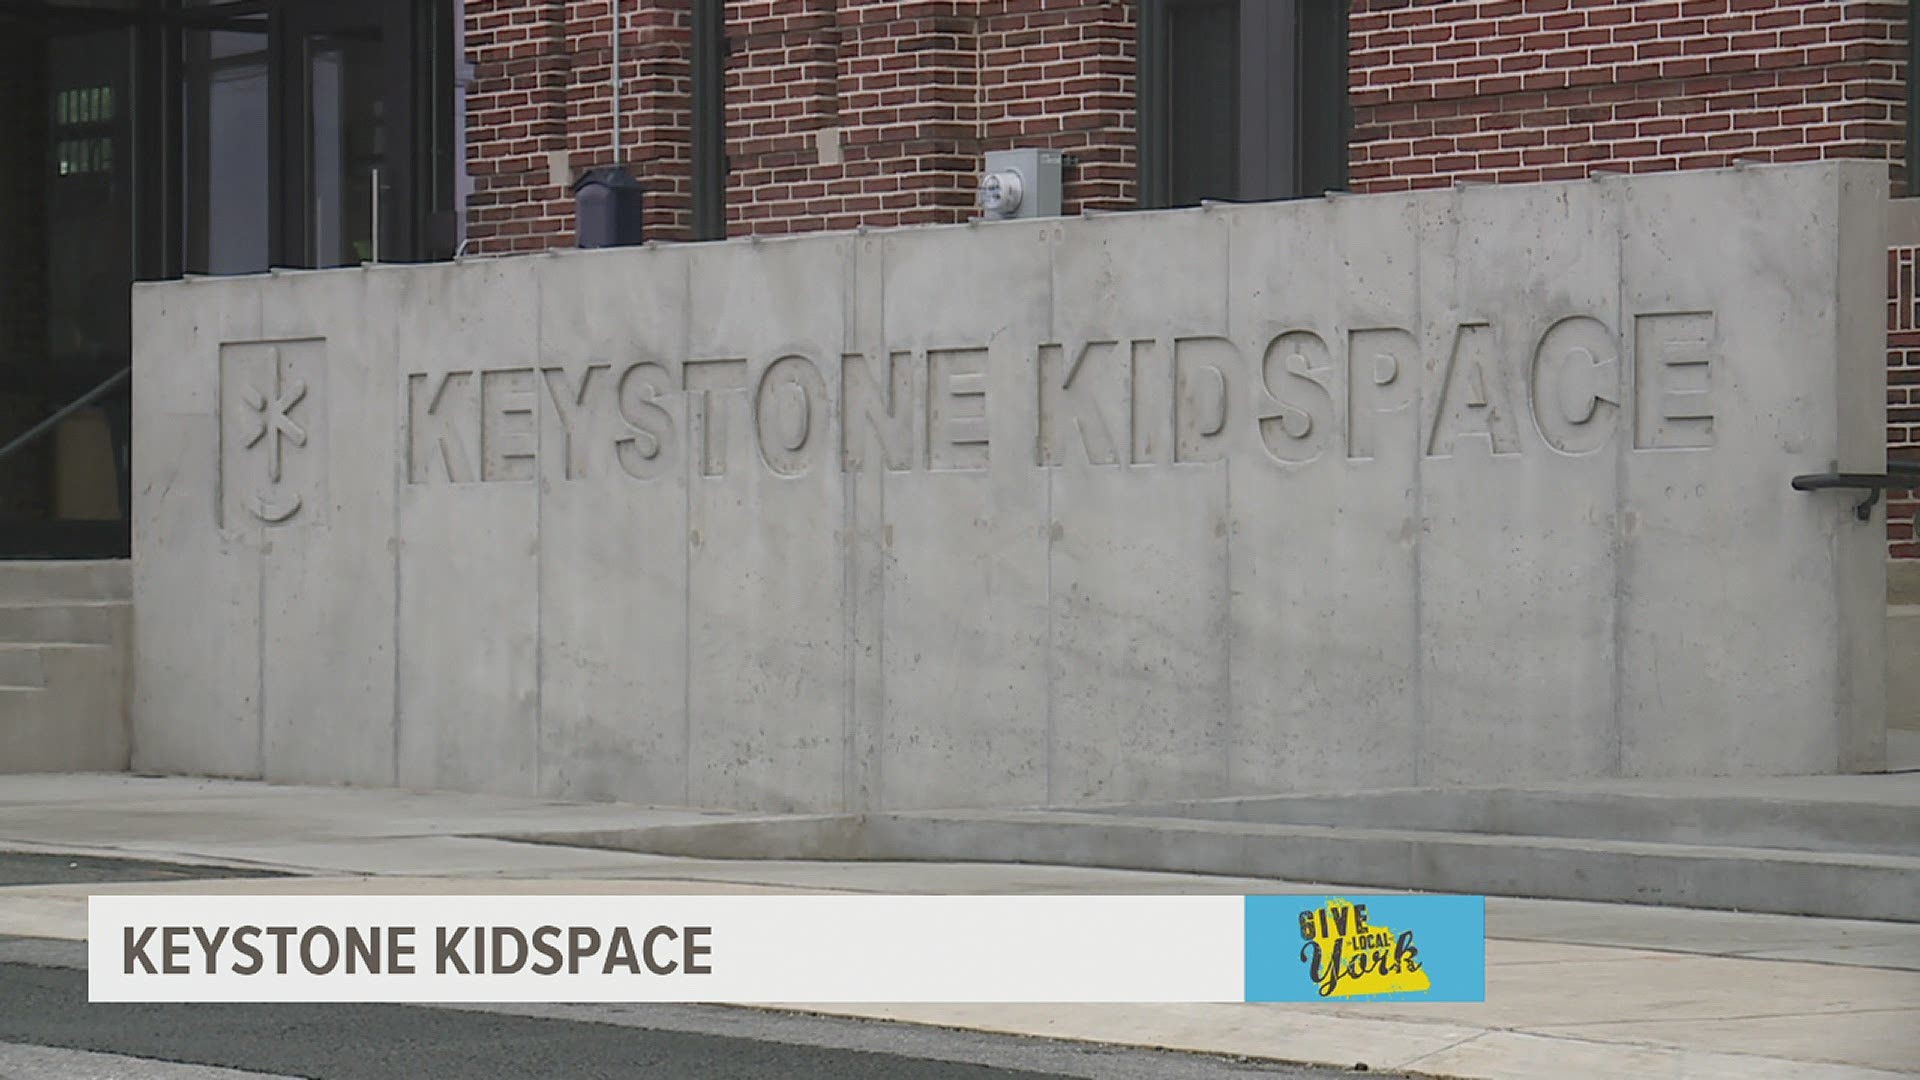 Keystone Kidspace will be one of many organizations to benefit from Give Local York on May 7.